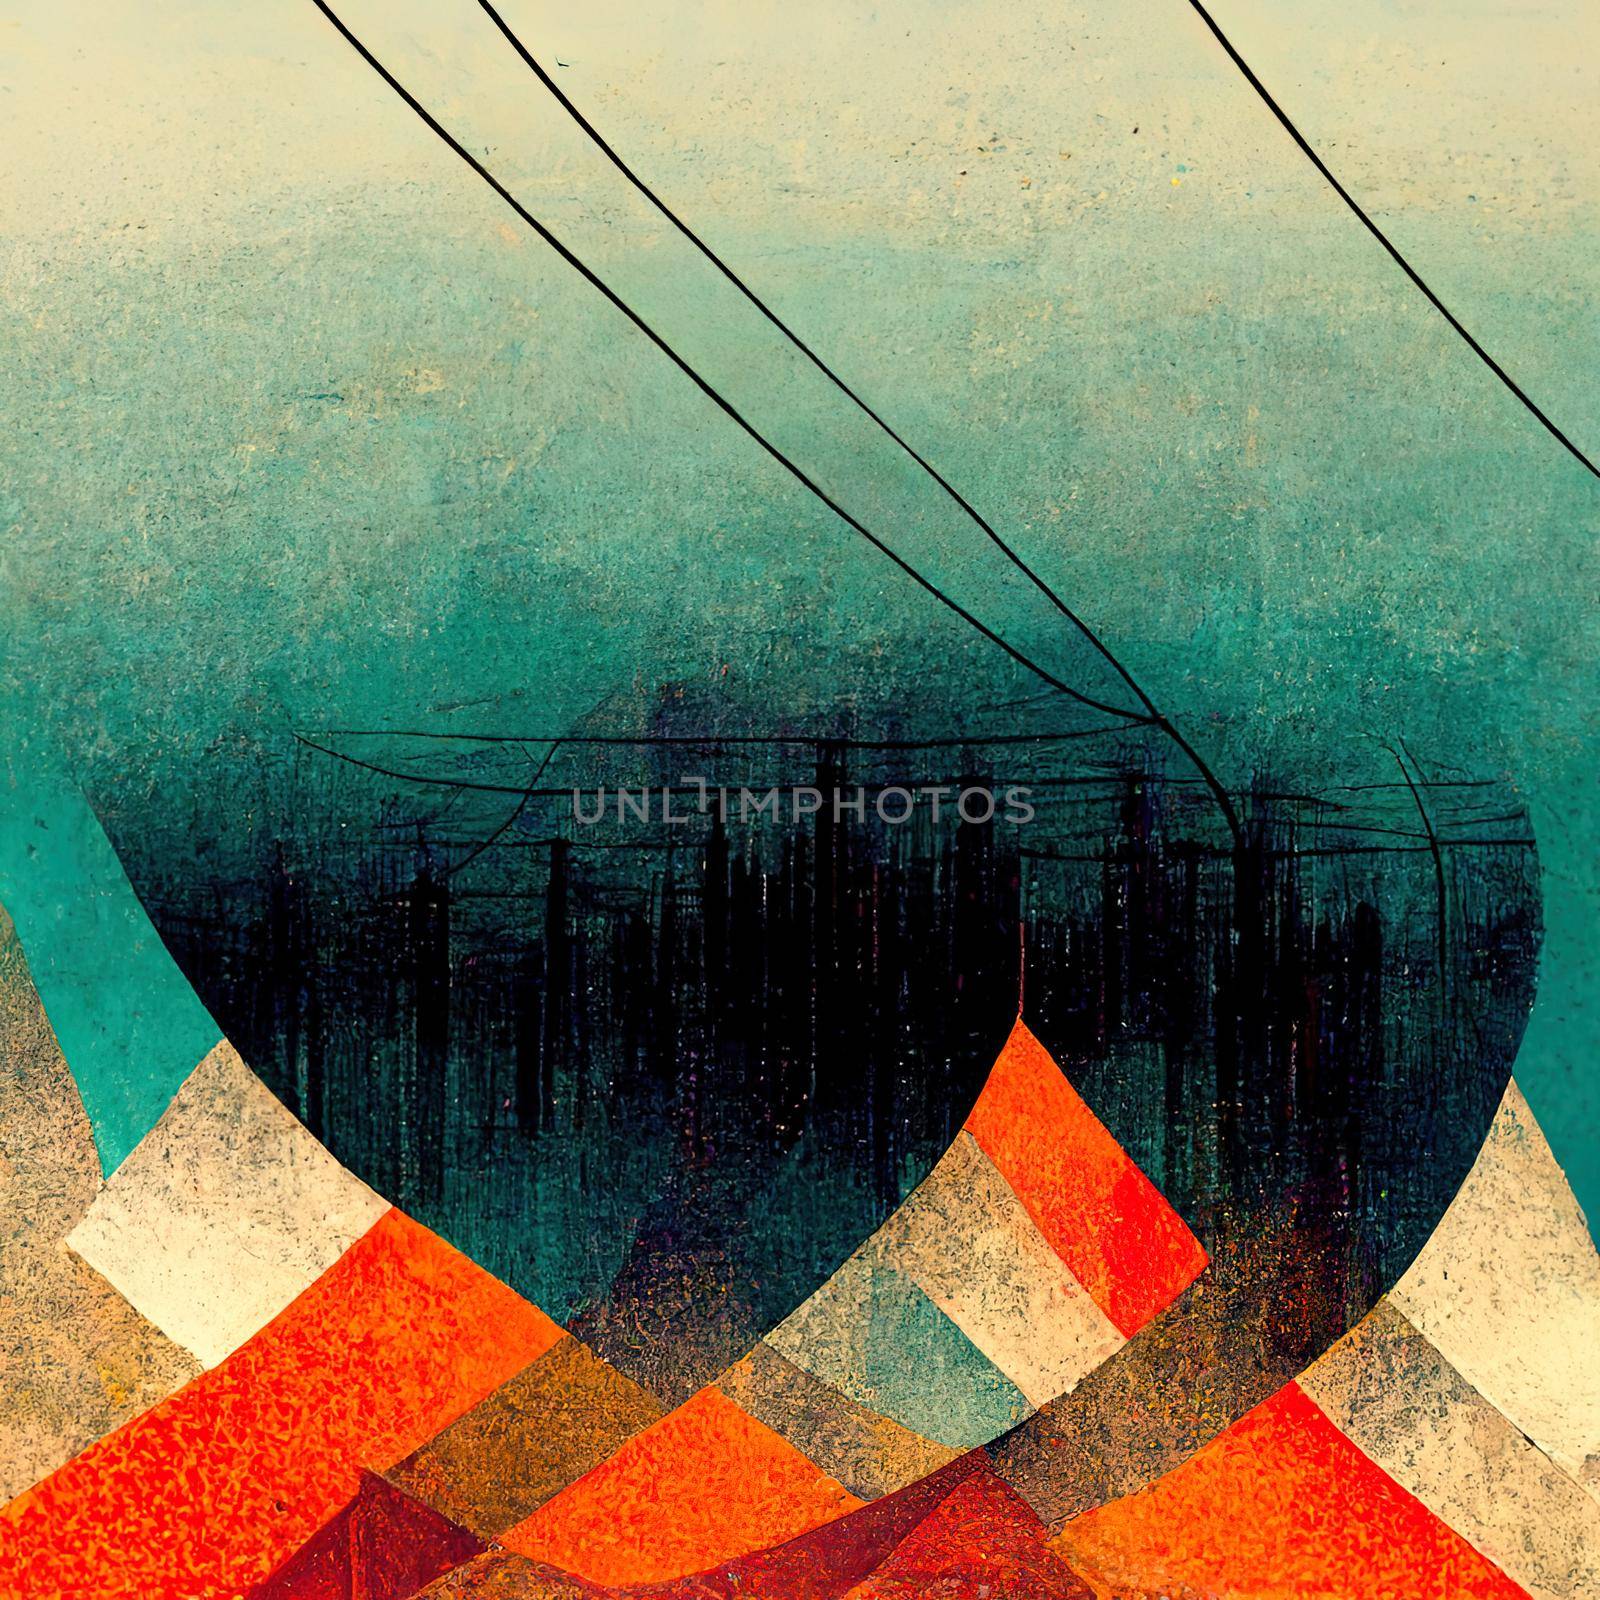 Metal wires, abstract illustration. High quality 3d illustration